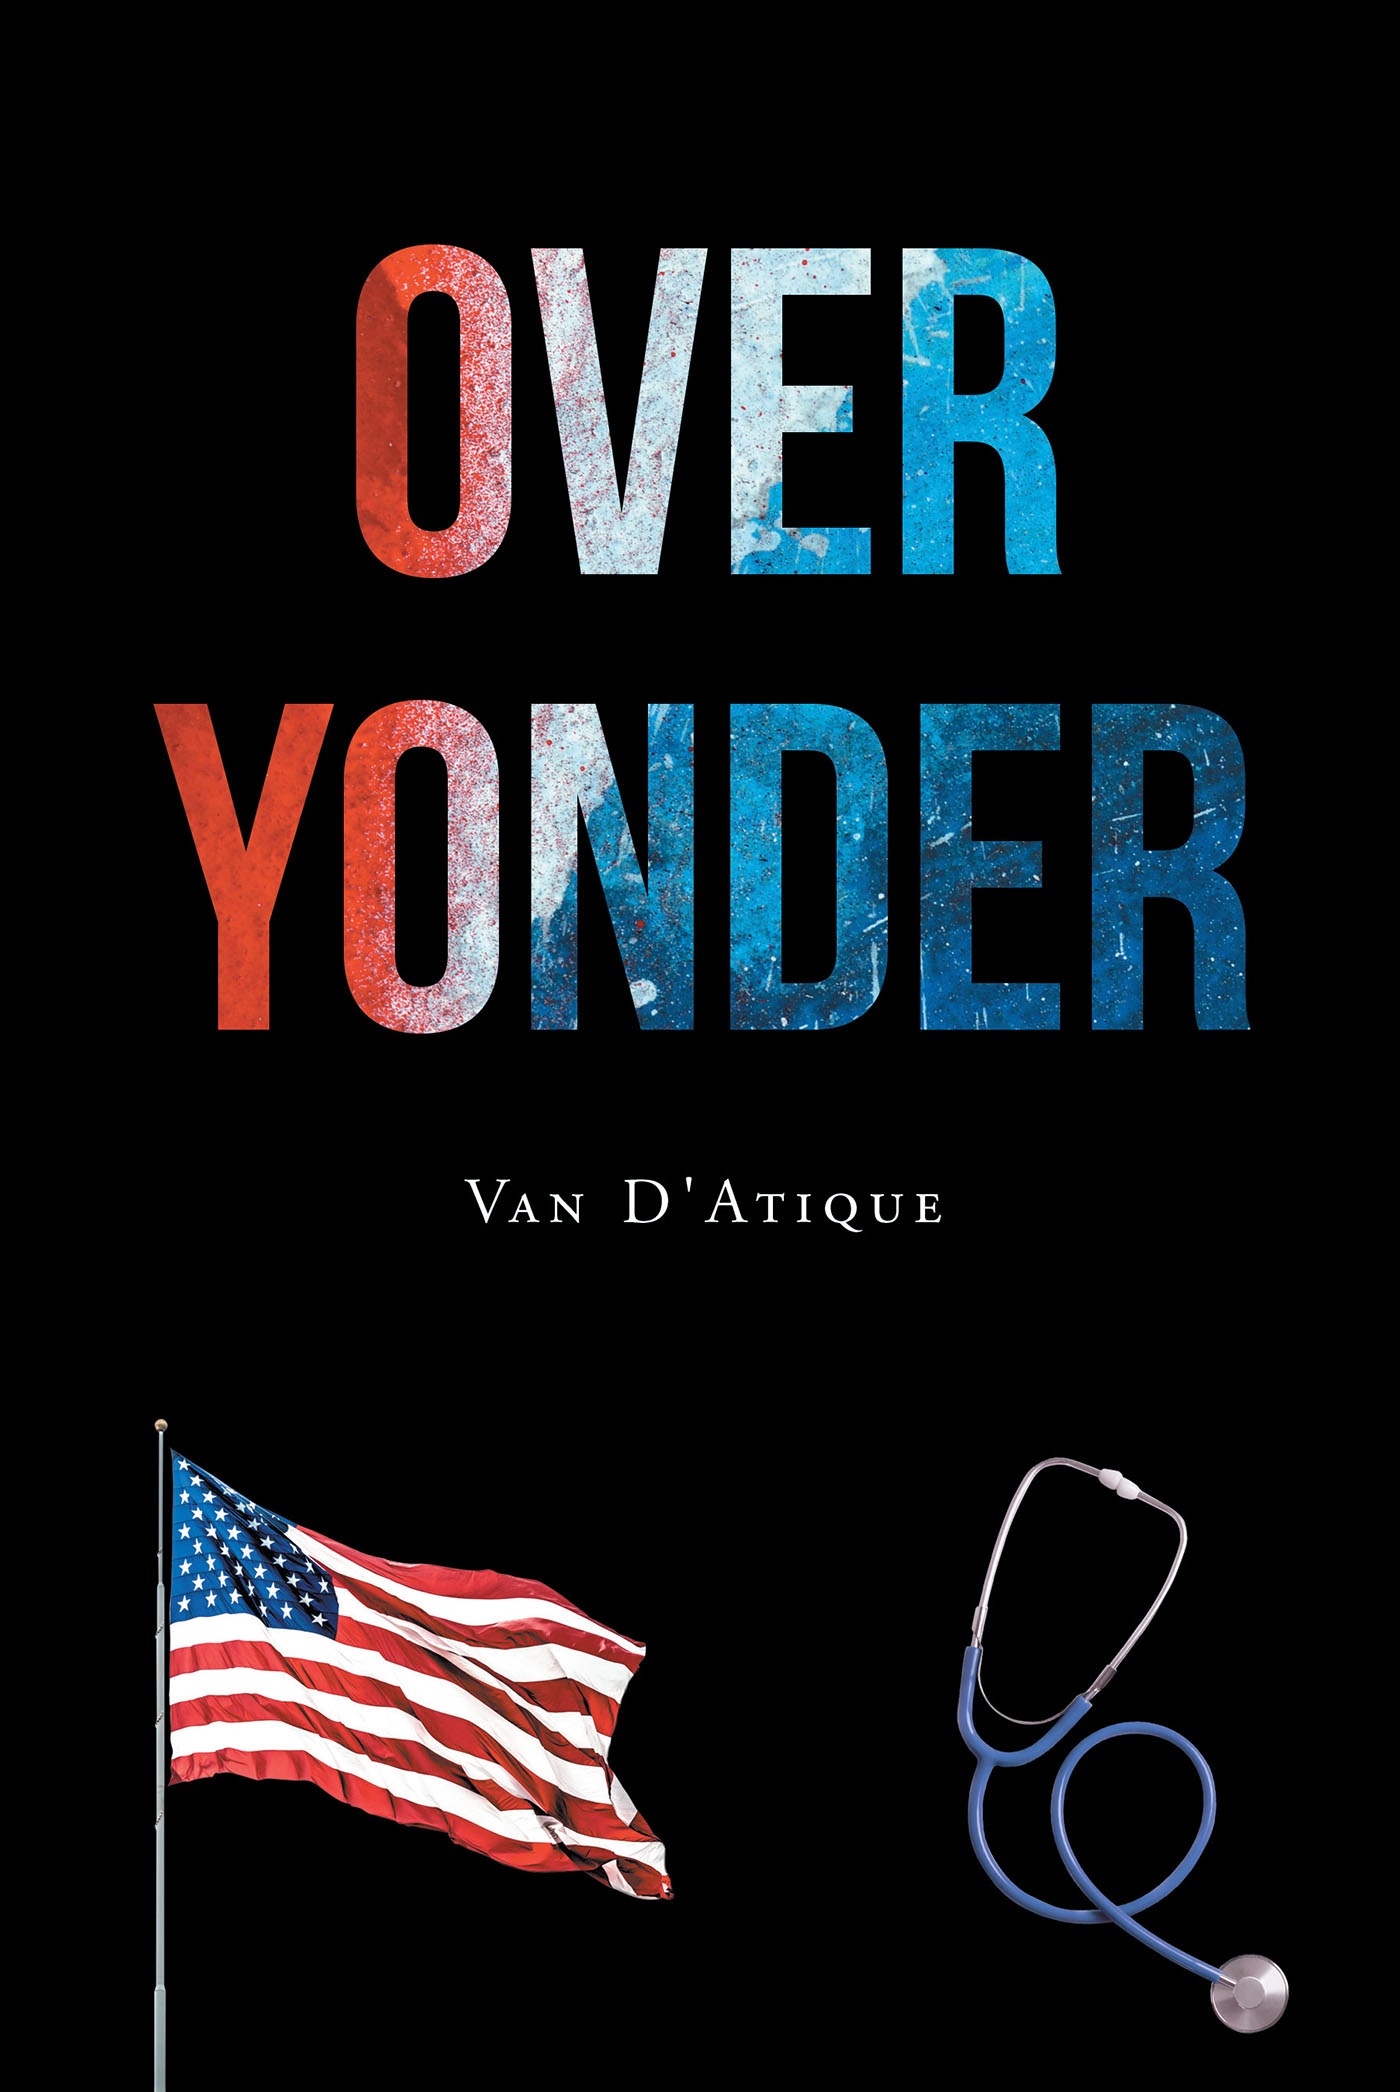 Author Van D'Atique’s New Book, "Over Yonder," is an Eye-Opening Story That Follows the Author Through His Studies His Europe & How He Was Treated by Those Living There